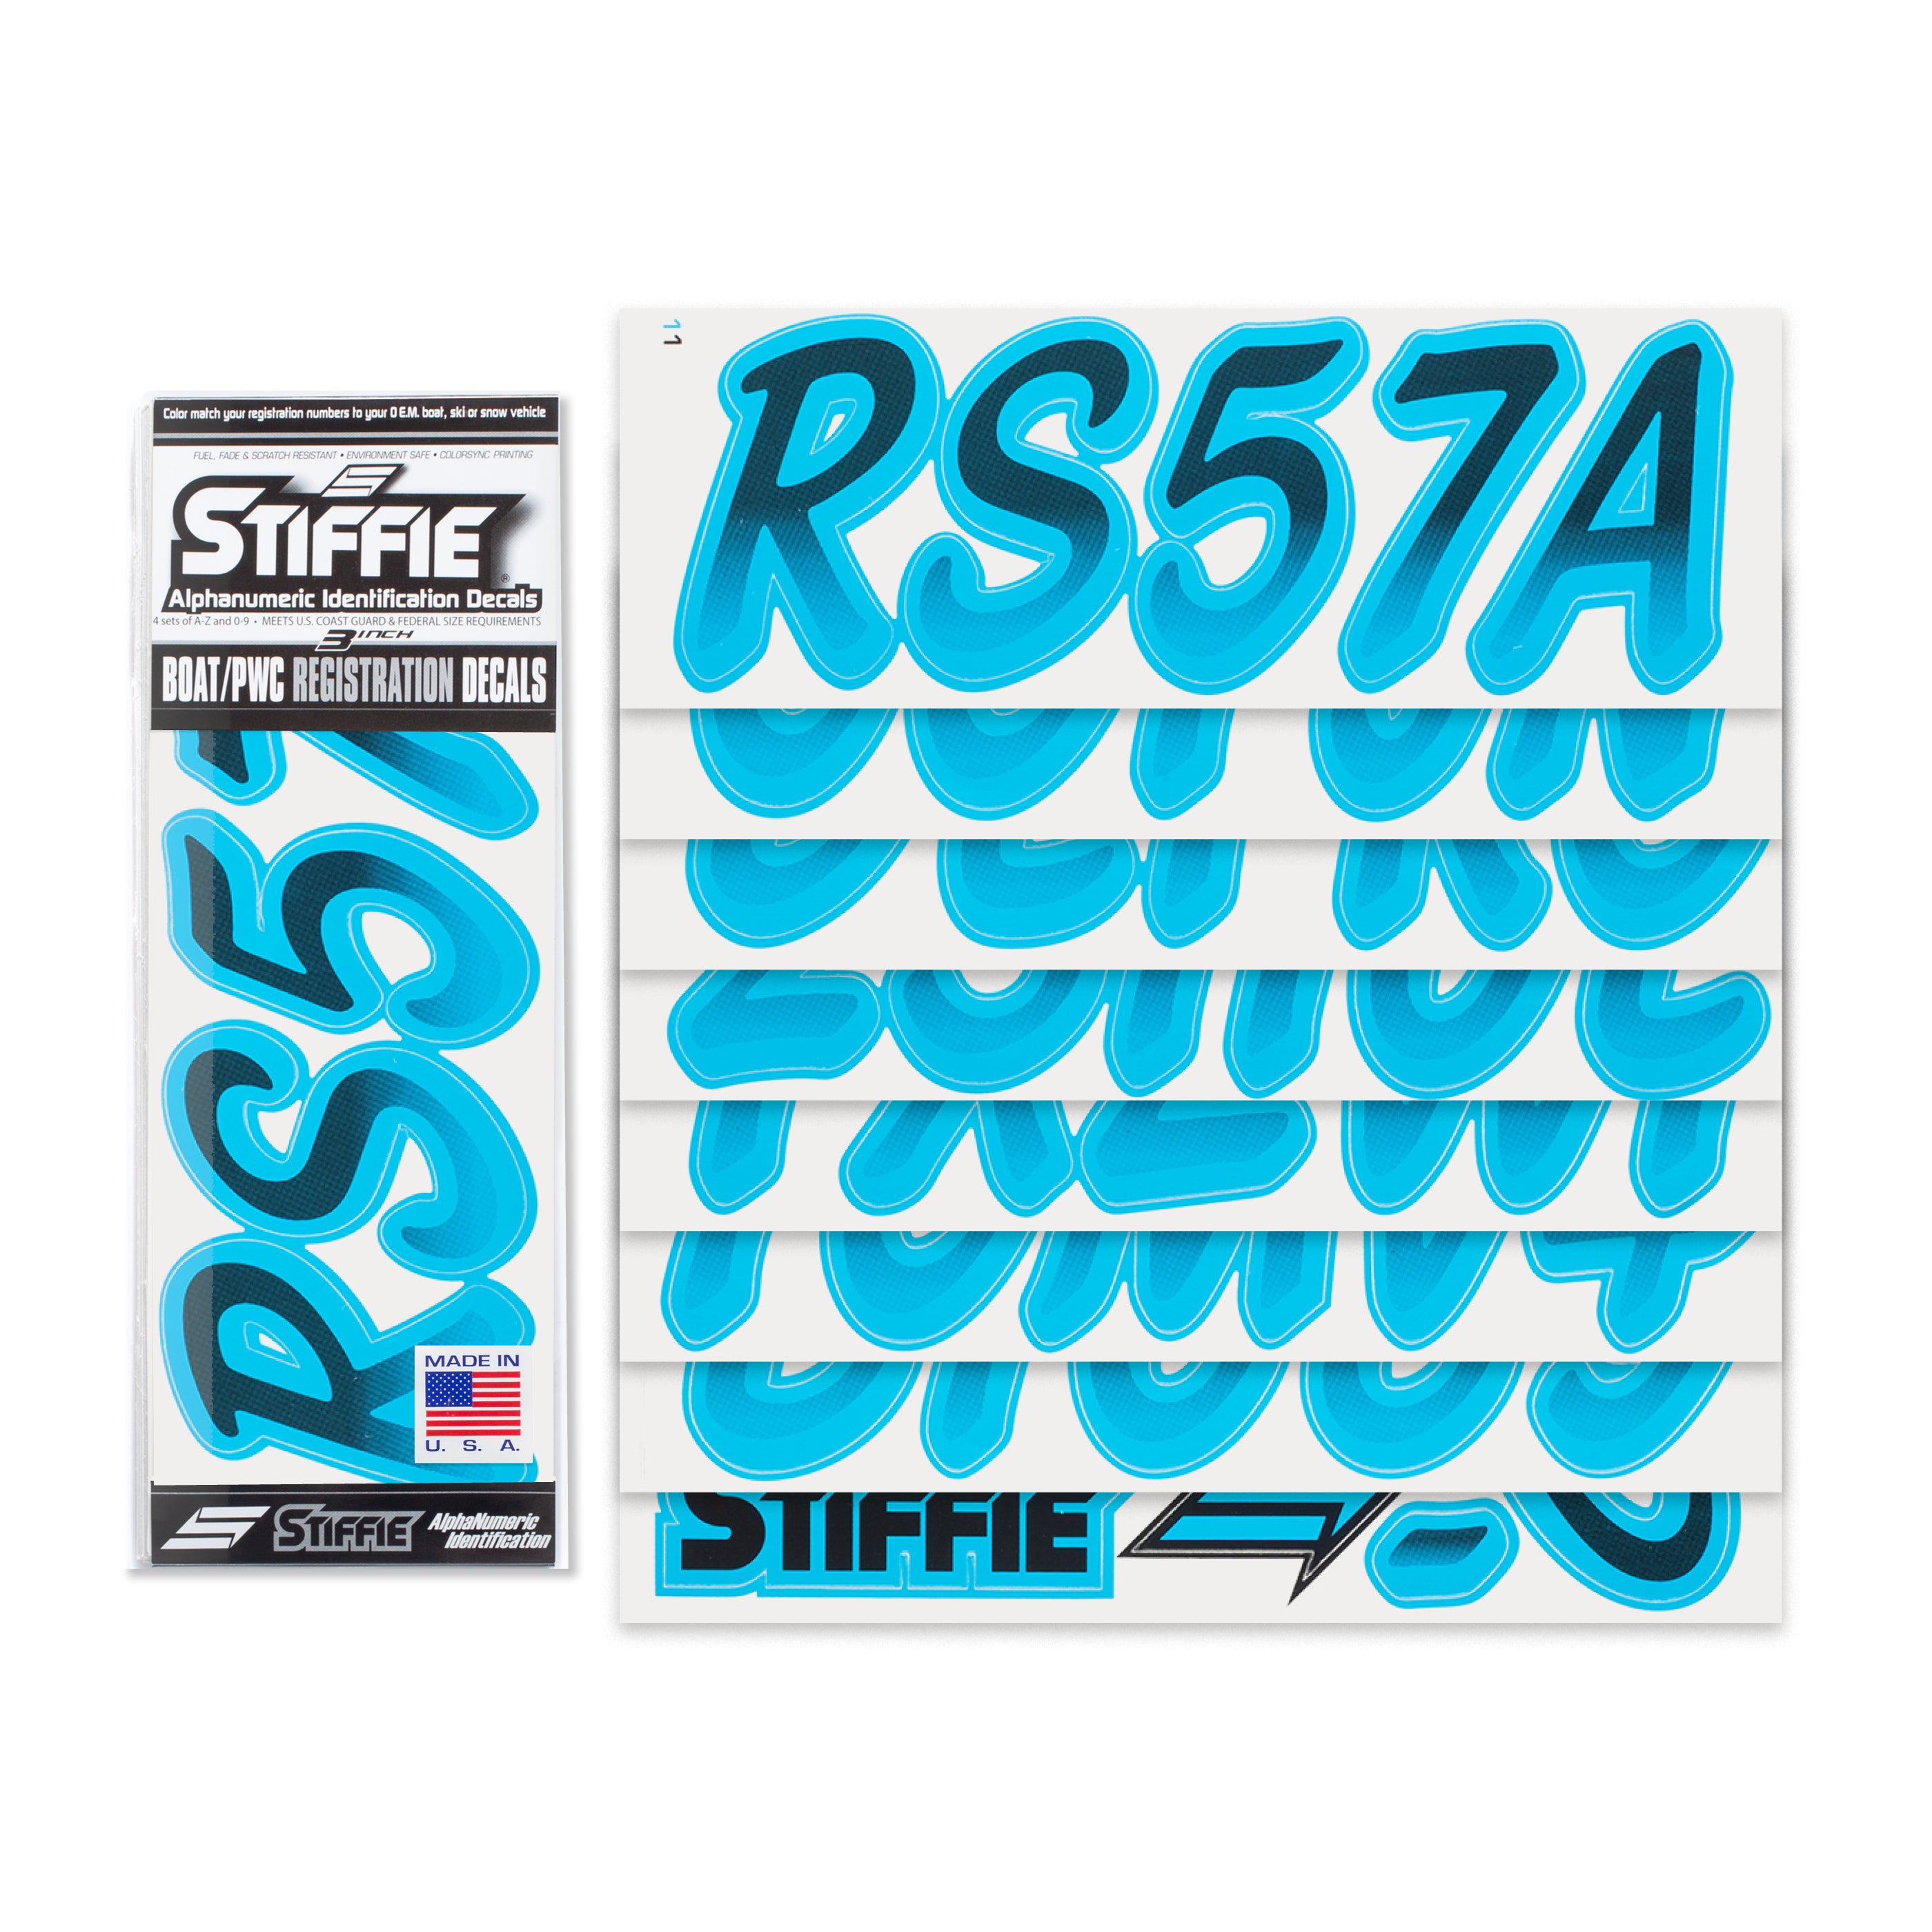 STIFFIE Whipline Black/Sky Blue 3" Alpha-Numeric Registration Identification Numbers Stickers Decals for Boats & Personal Watercraft: Matches Sea-Doo 2016+ GTX LTD 300, 215, is 260, 230